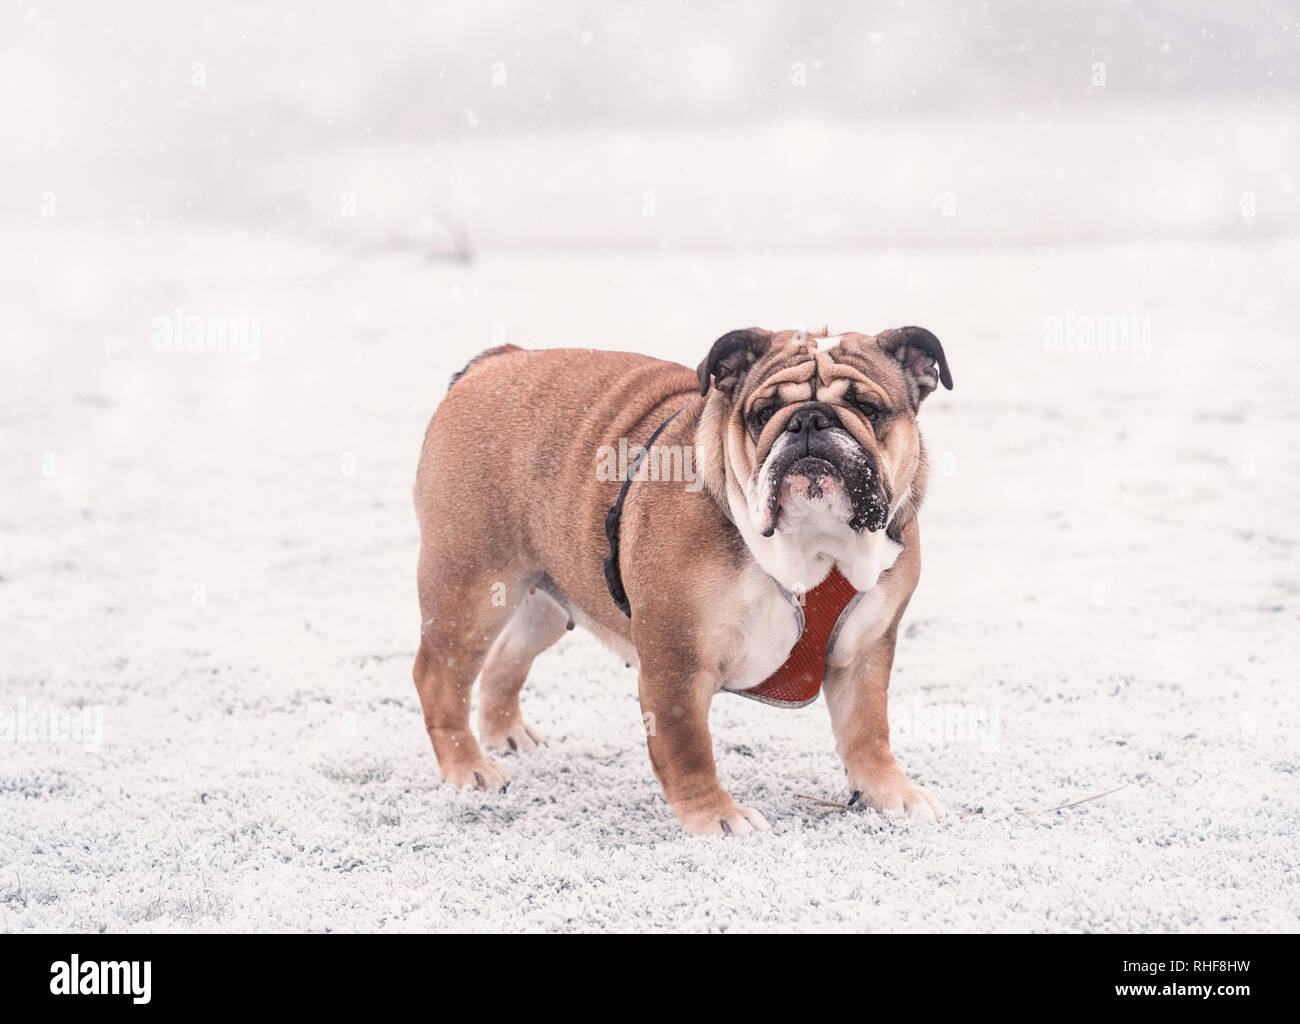 Funny dog of red and black english bulldog playing on the snow looking at camera. Stock Photo